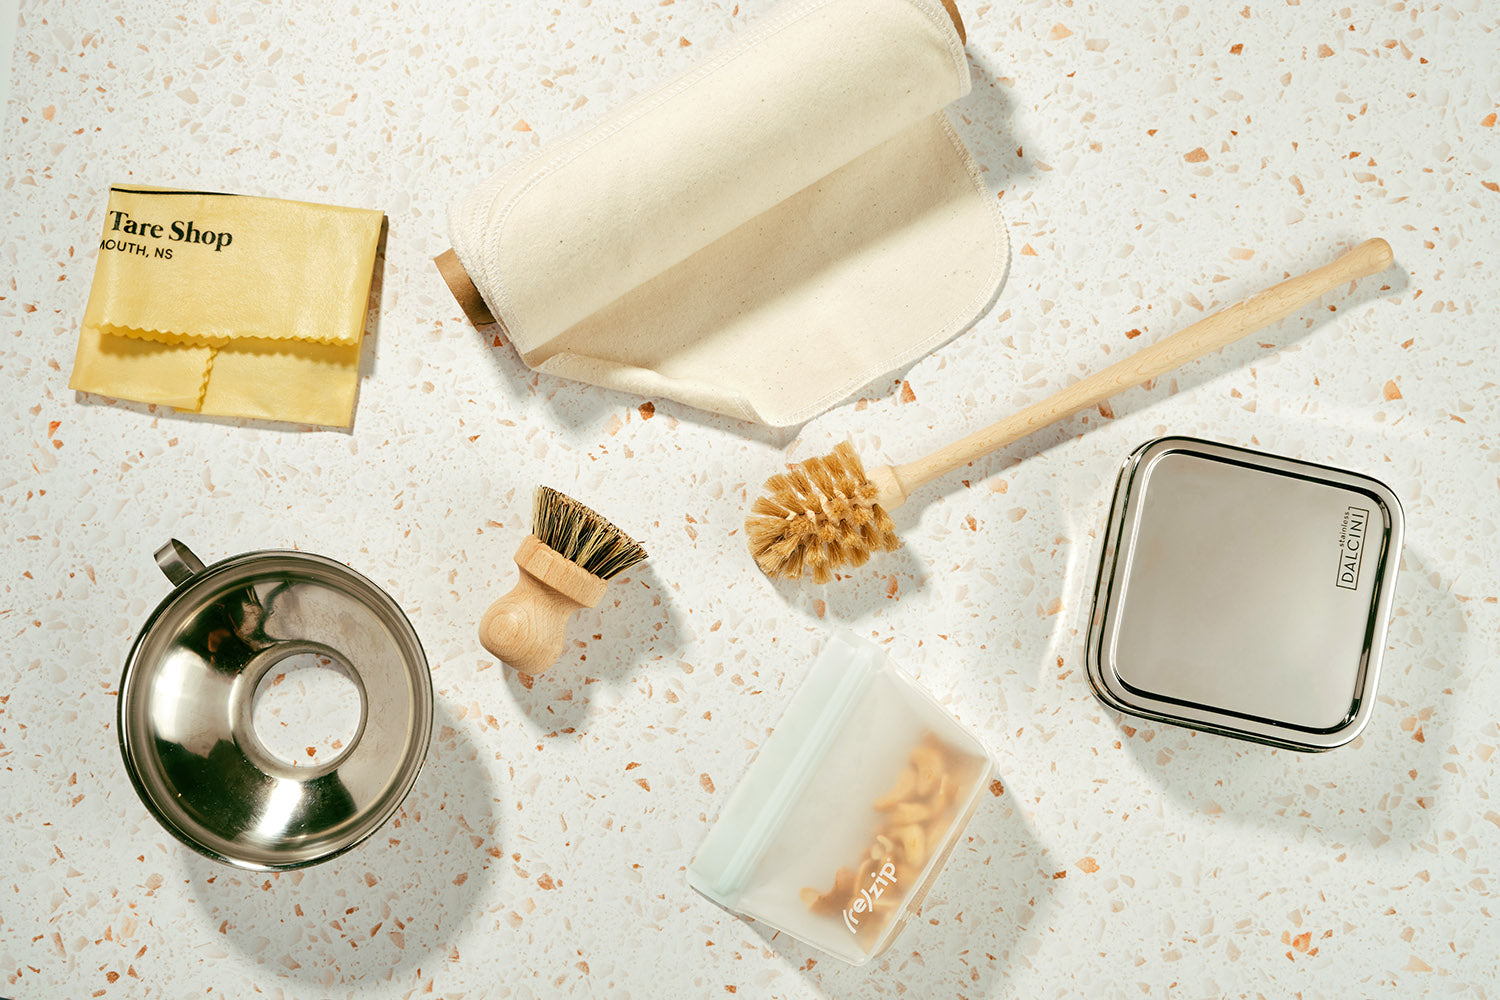 An assortment of kitchen lifestyle goods sit on a terrazzo counter.